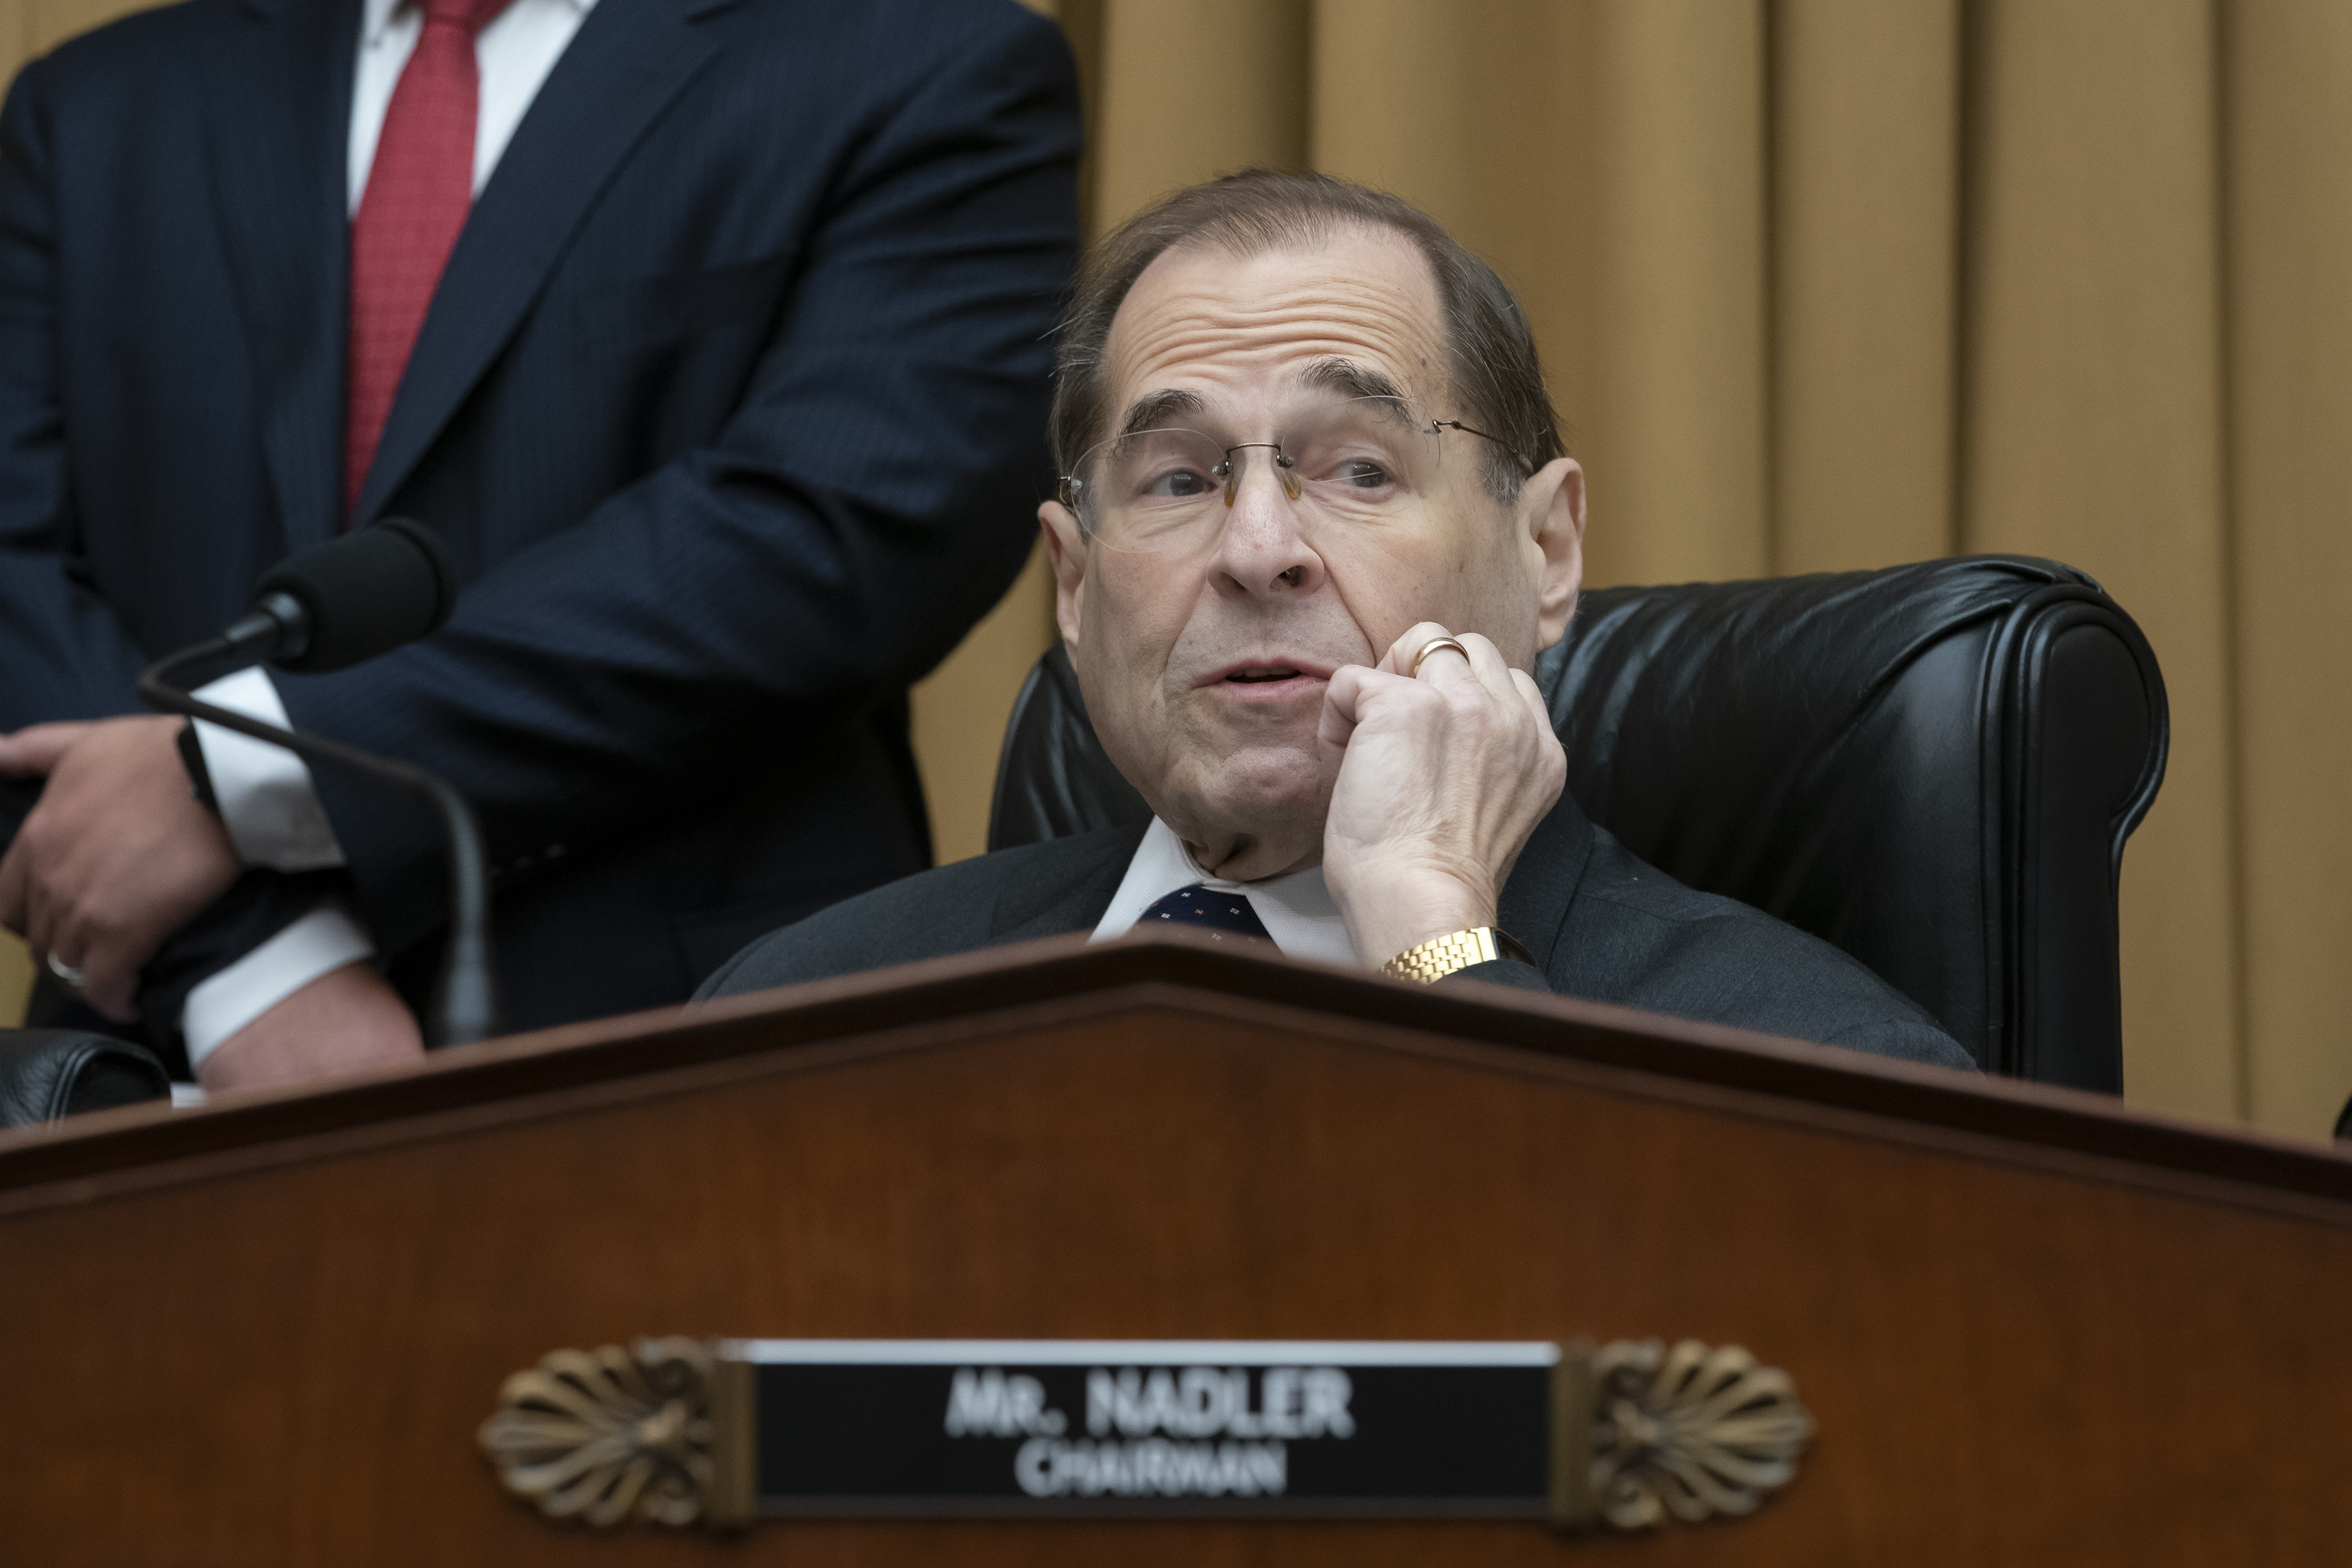 House Judiciary Committee Chair Jerrold Nadler waits to start a hearing on the Mueller report without witness Attorney General William Barr who refused to appear, on Capitol Hill in Washington, Thursday, May 2, 2019. The House Judiciary Committee is threatening to hold William Barr in contempt if he does not provide the full, unredacted Mueller report. (J. Scott Applewhite—AP)